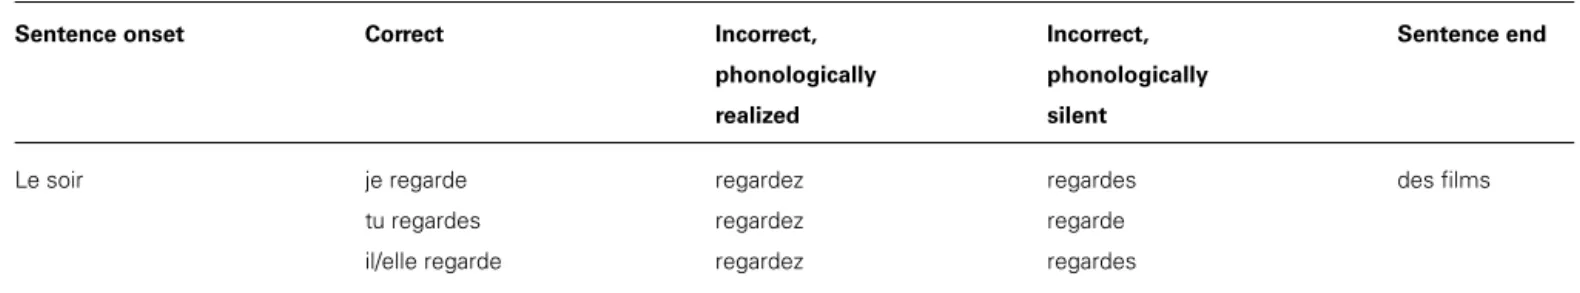 Table 2 | Examples of the three sentence conditions (correct, incorrect and orally realized, incorrect and silent) for the three singular verbal persons in French used in Experiment 2.